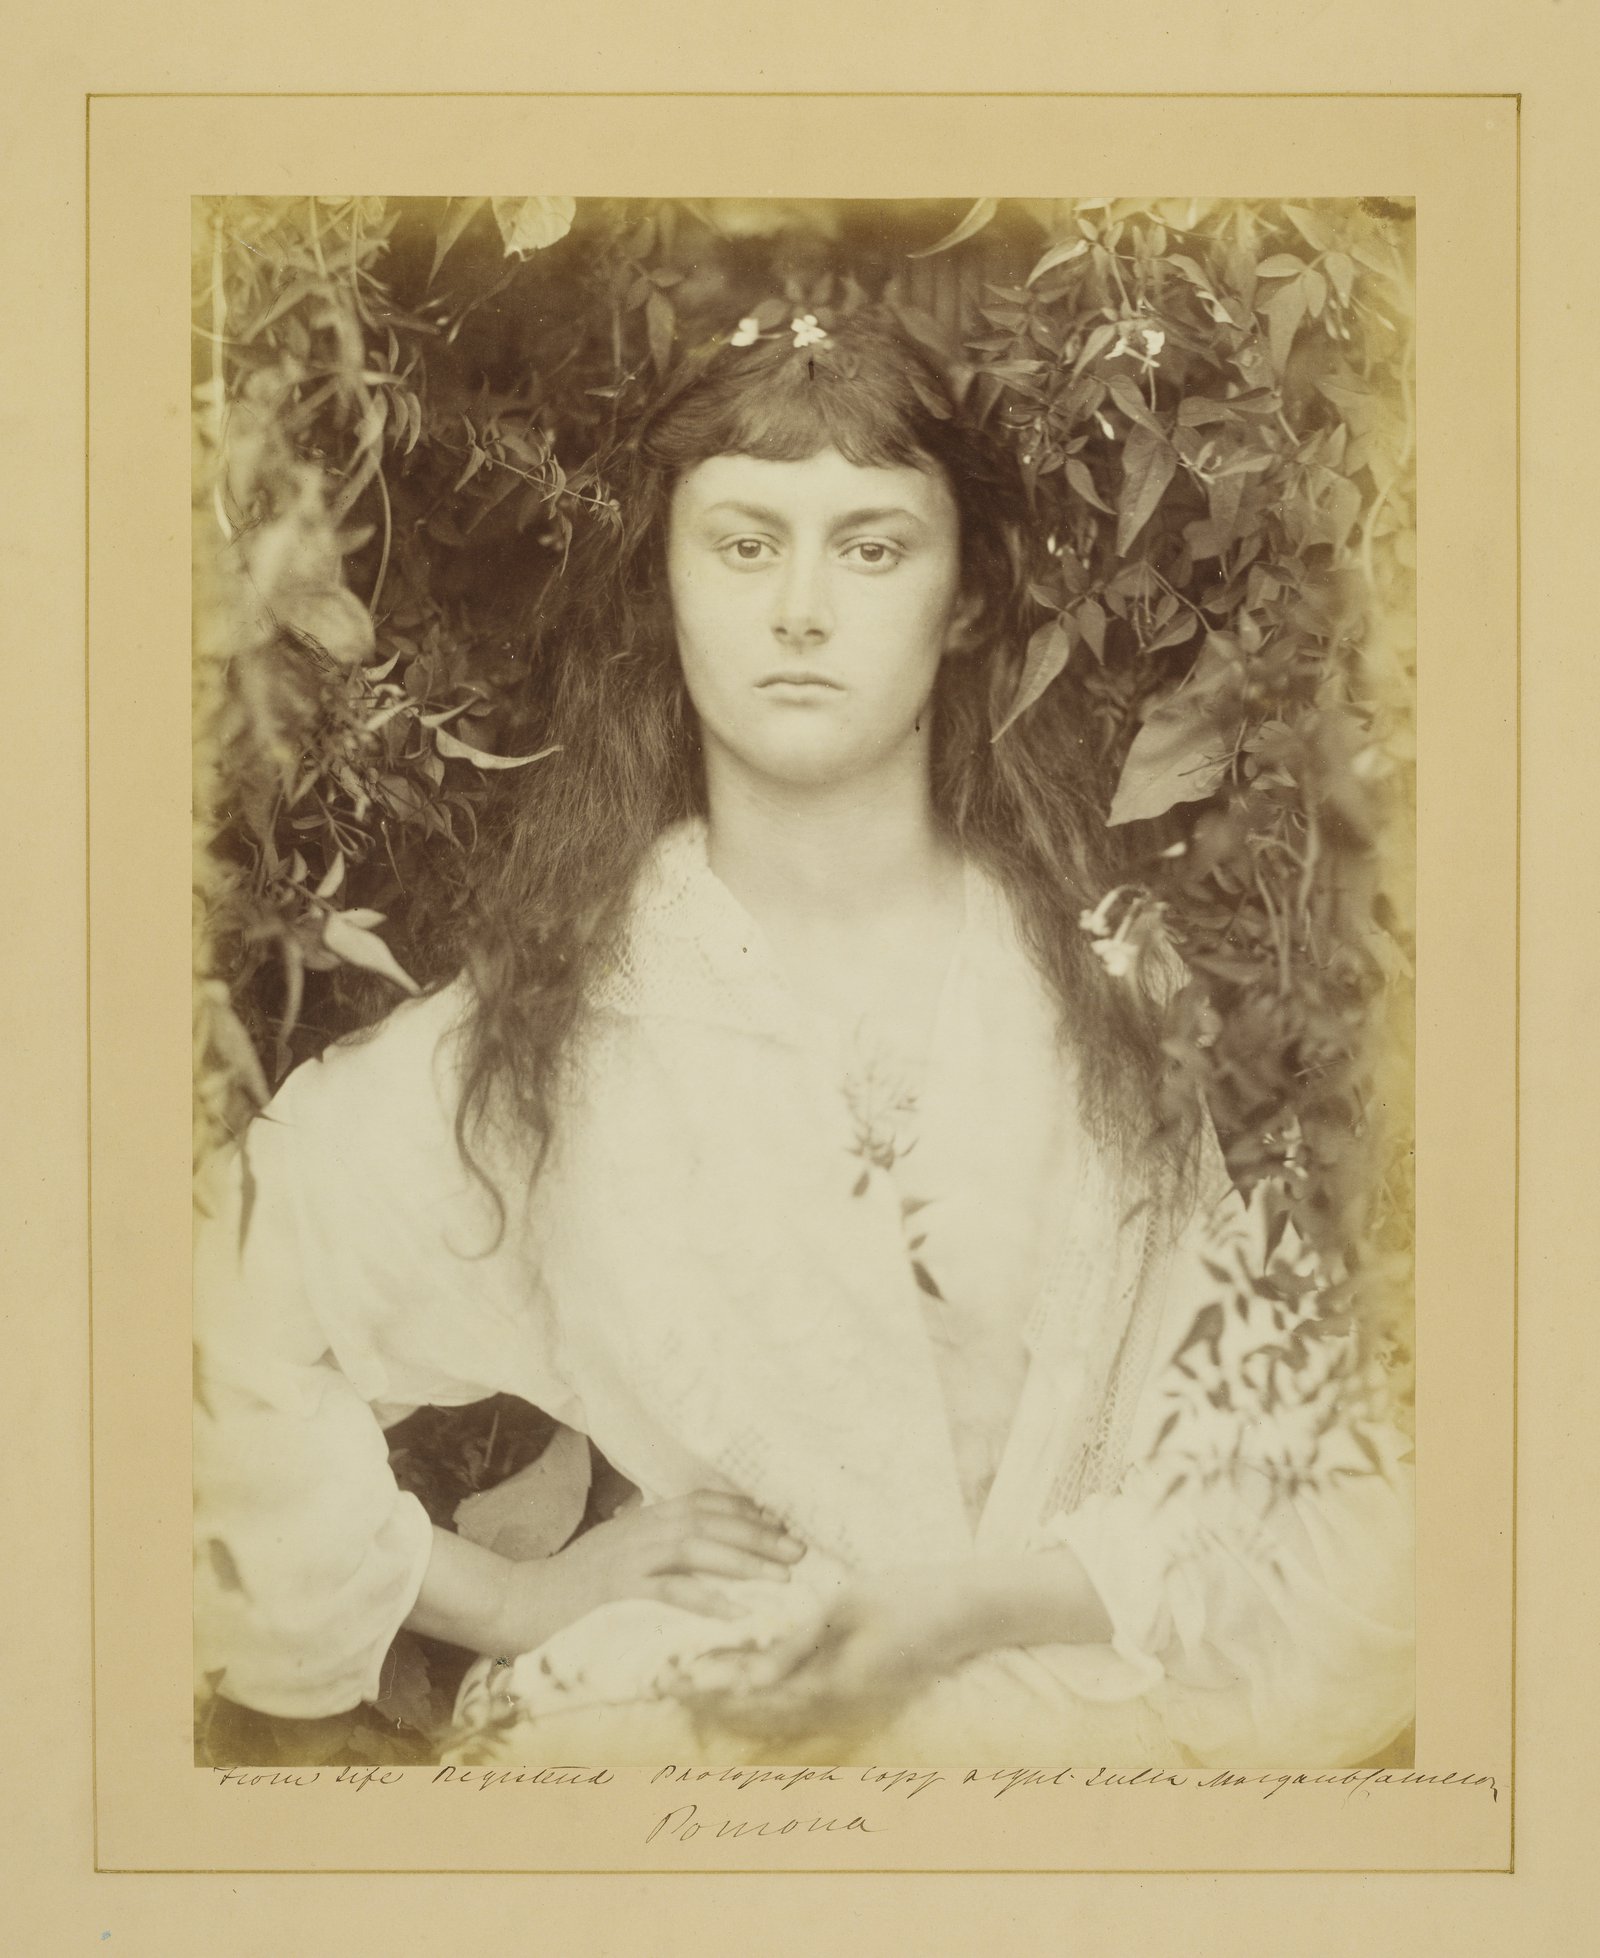 Julia Margaret Cameron, Pomona, 1887, Albumen print, © The RPS Collection at the Victoria and Albert Museum, London